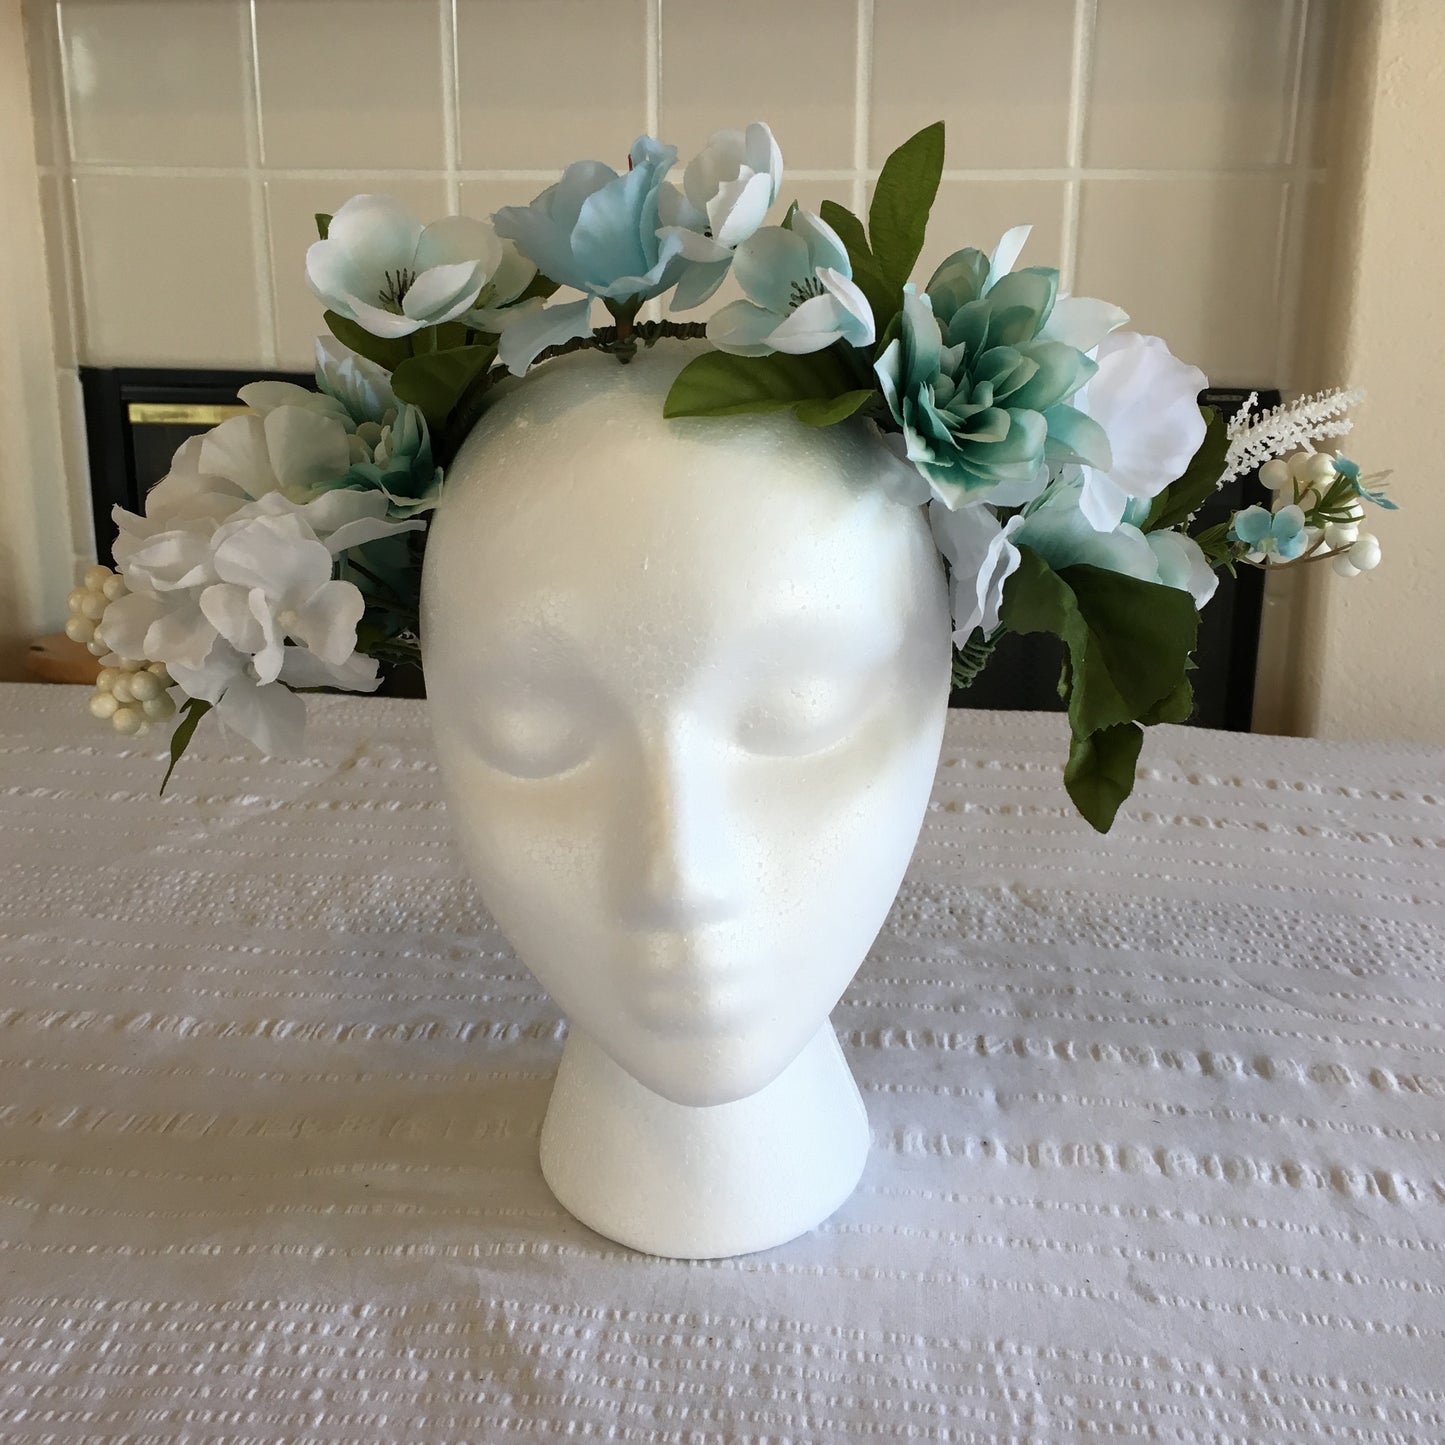 Large Wreath - Green, blues, teal & white flowers w/ white accents